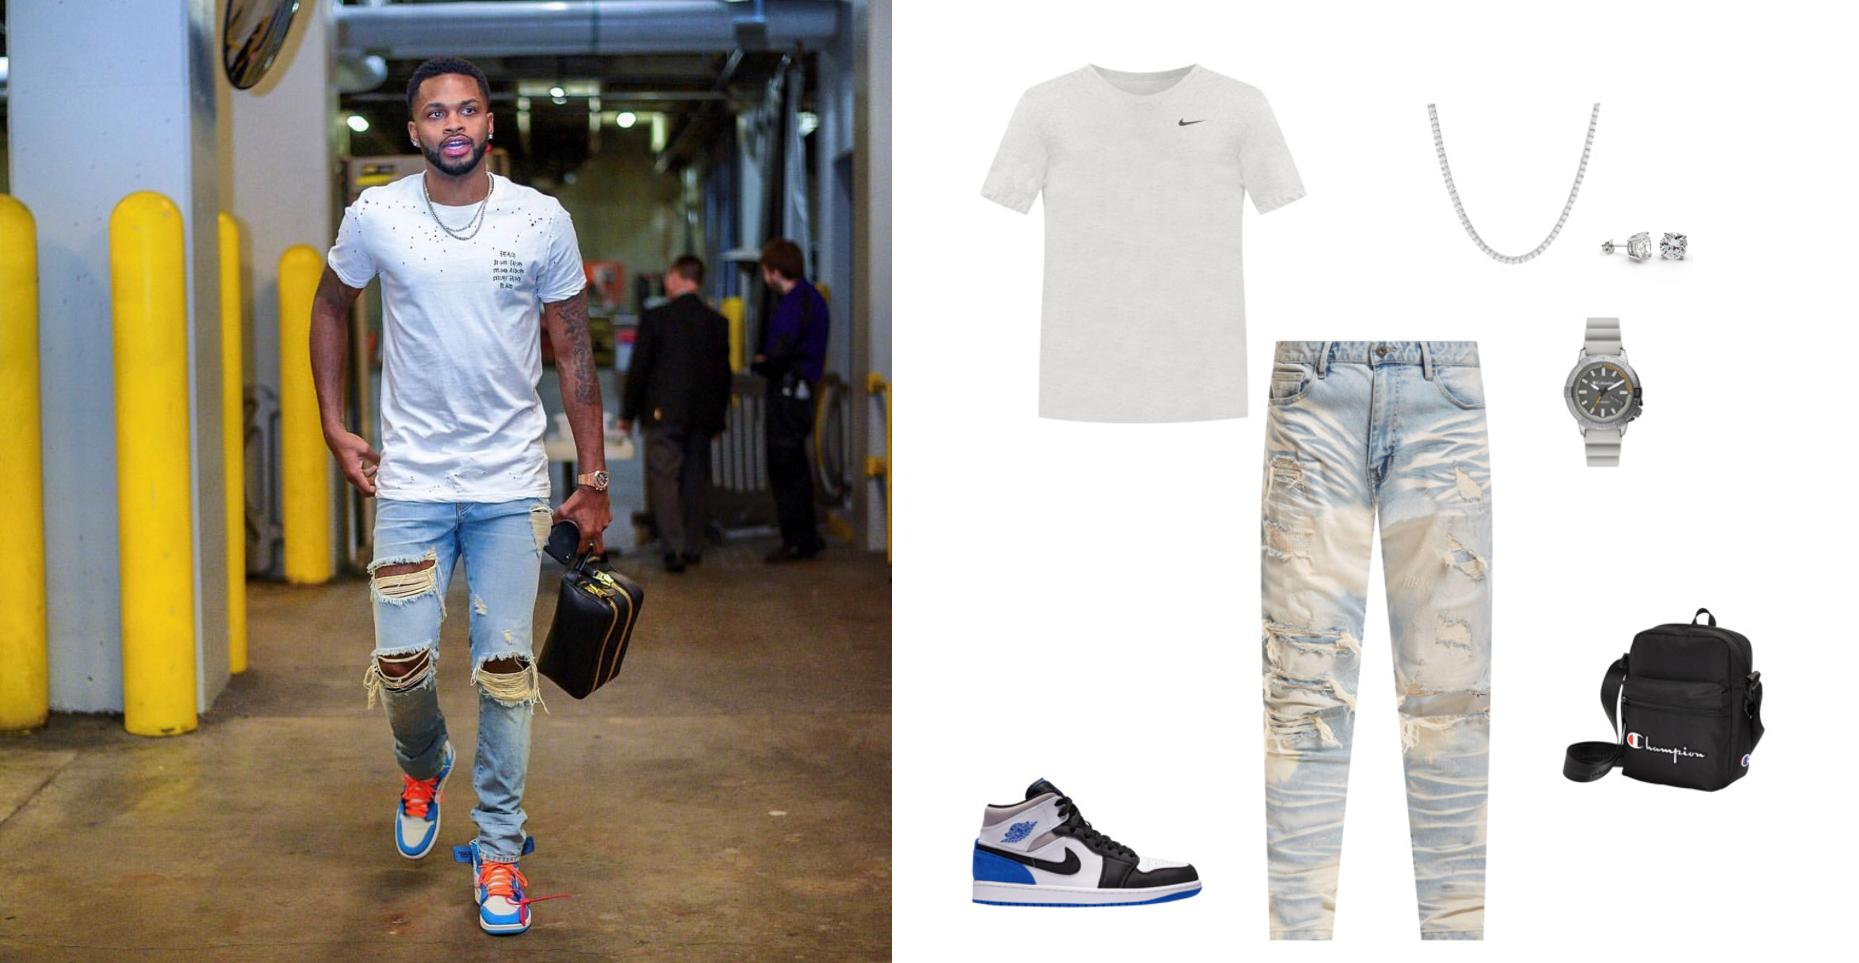 NBA Style Files: Pregame Looks We Can’t Wait To See